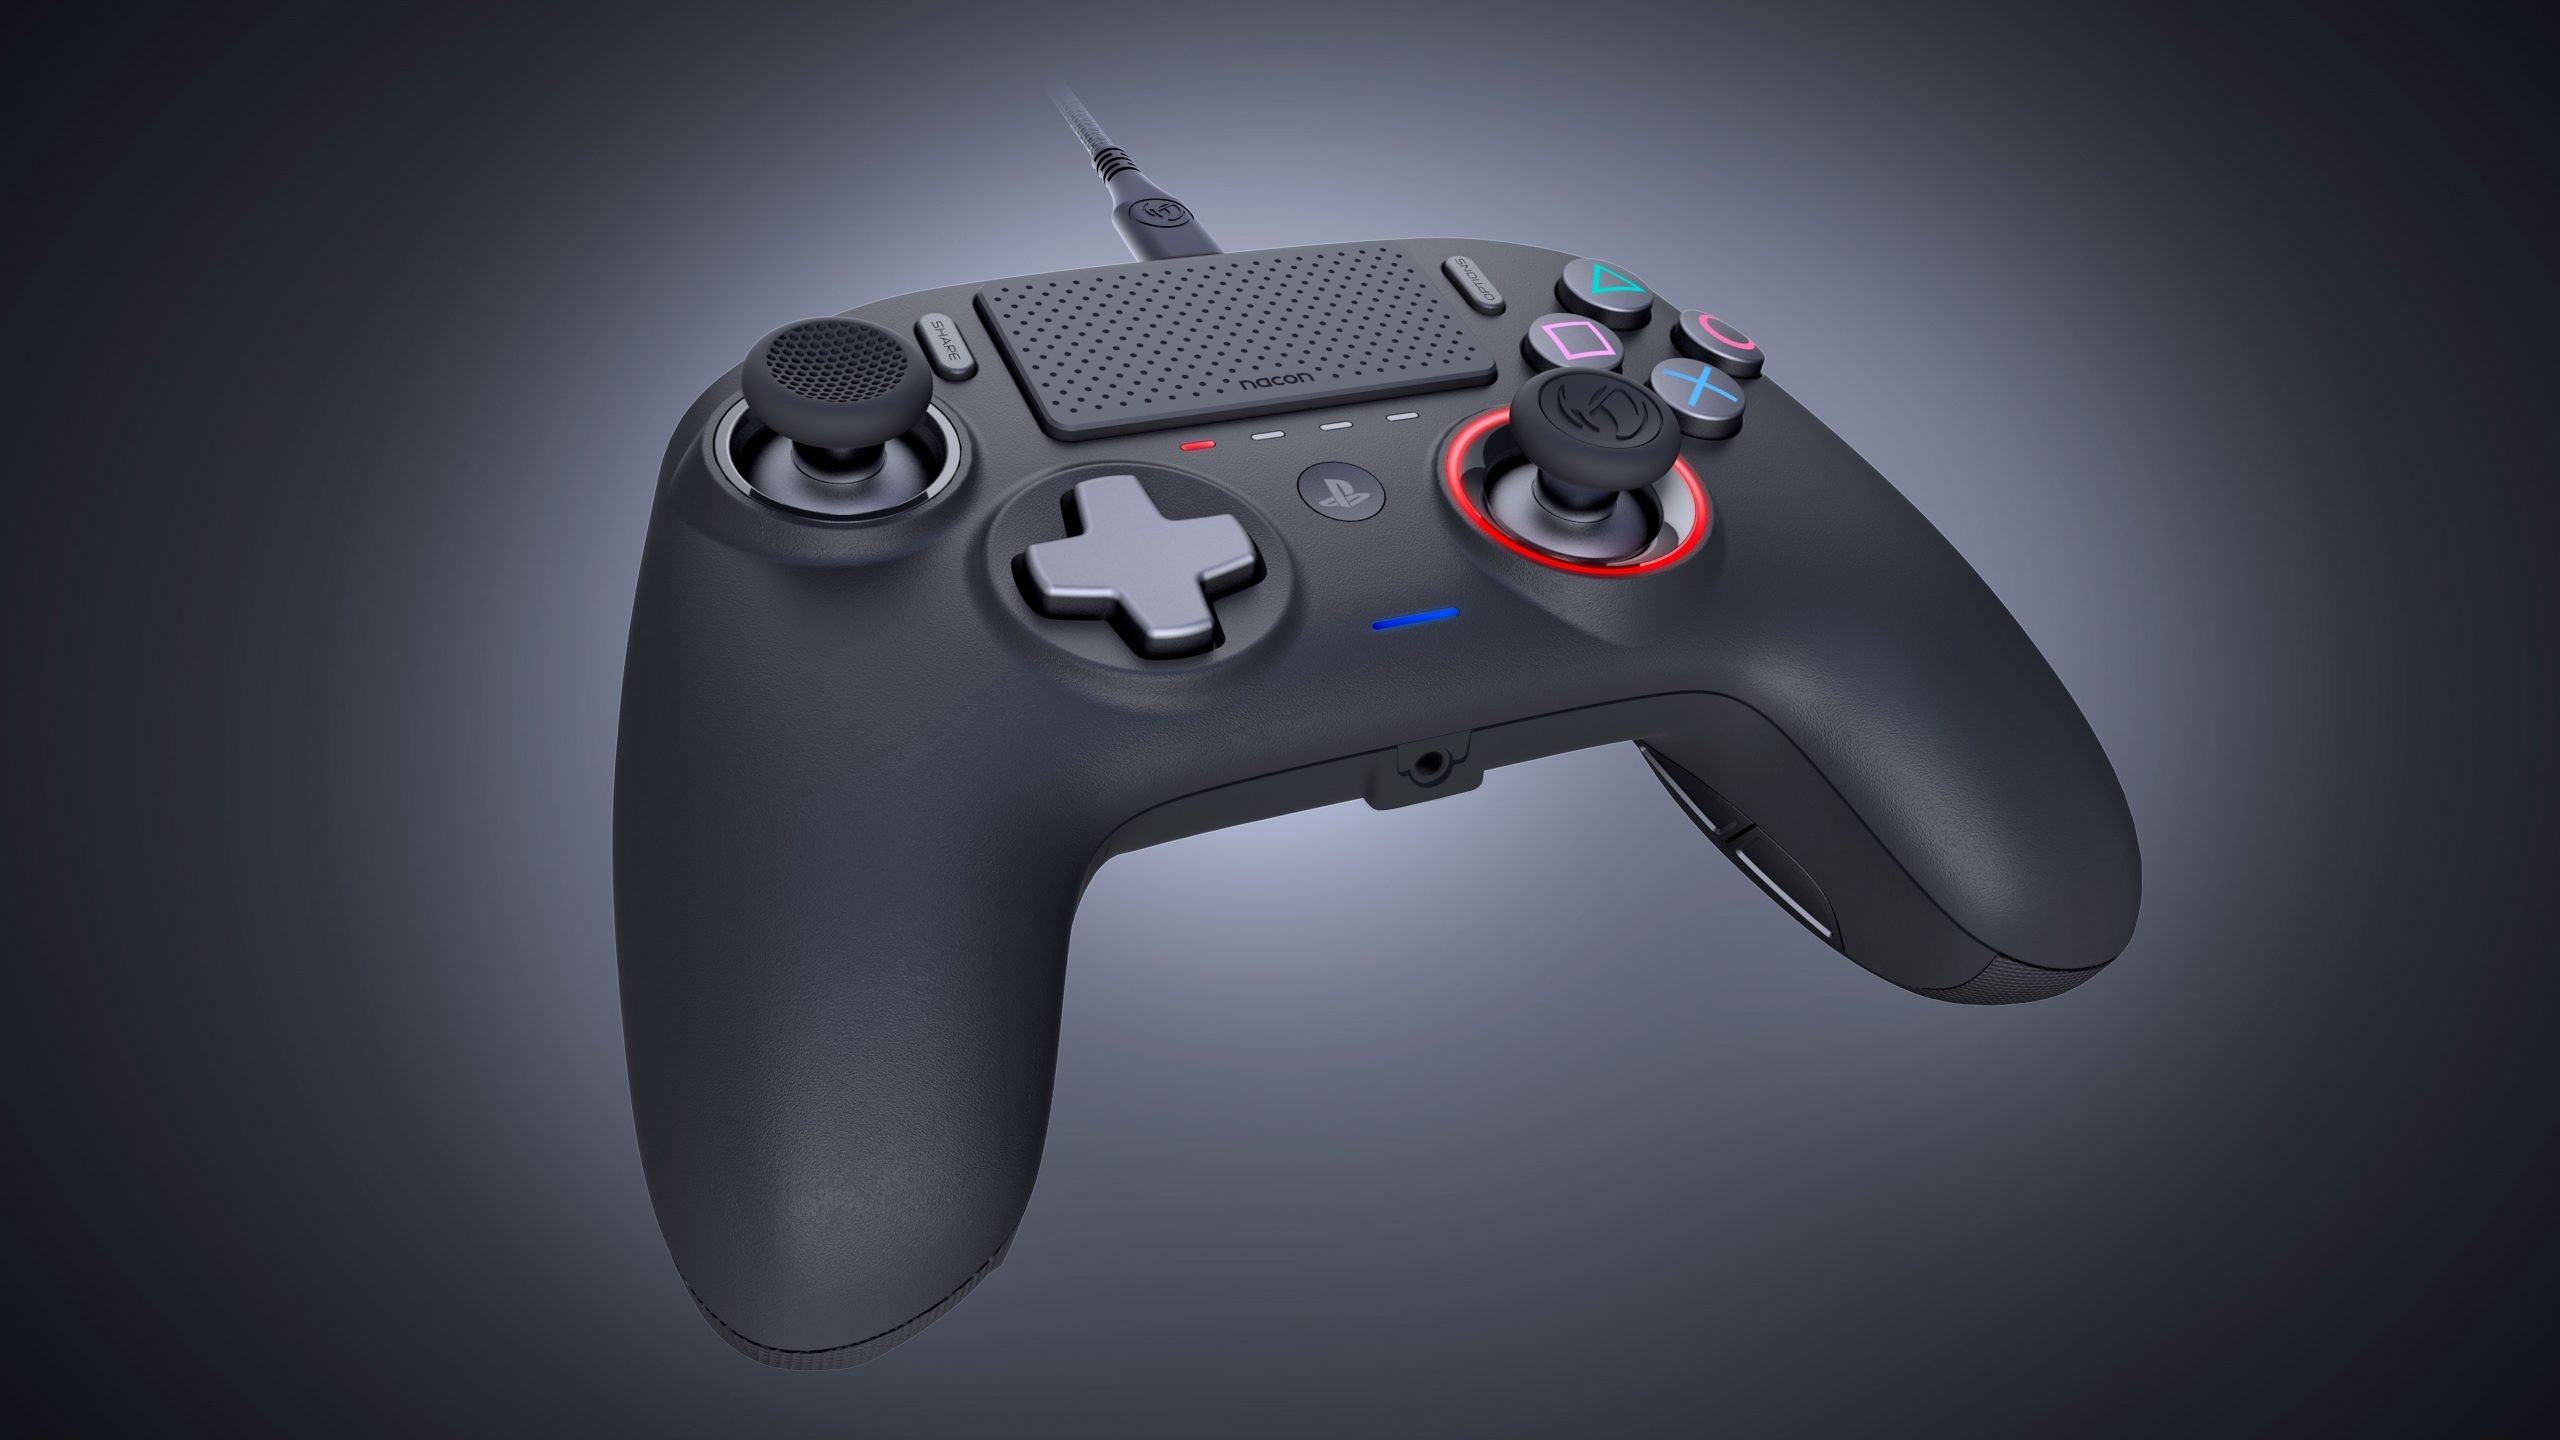 Another Officially Licensed Pro PS4 Controller from Nacon ...